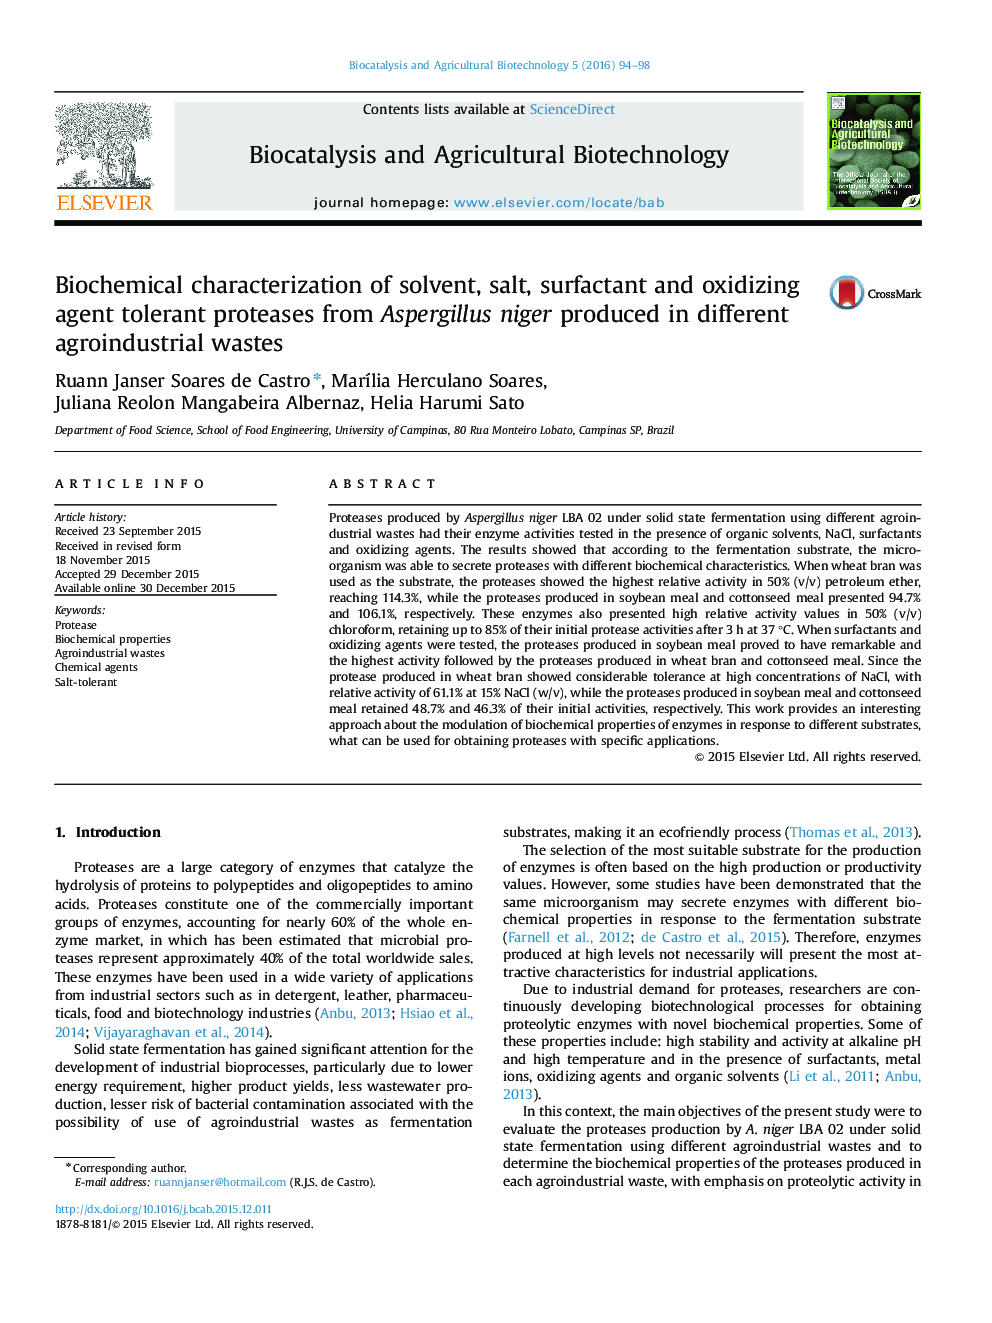 Biochemical characterization of solvent, salt, surfactant and oxidizing agent tolerant proteases from Aspergillus niger produced in different agroindustrial wastes